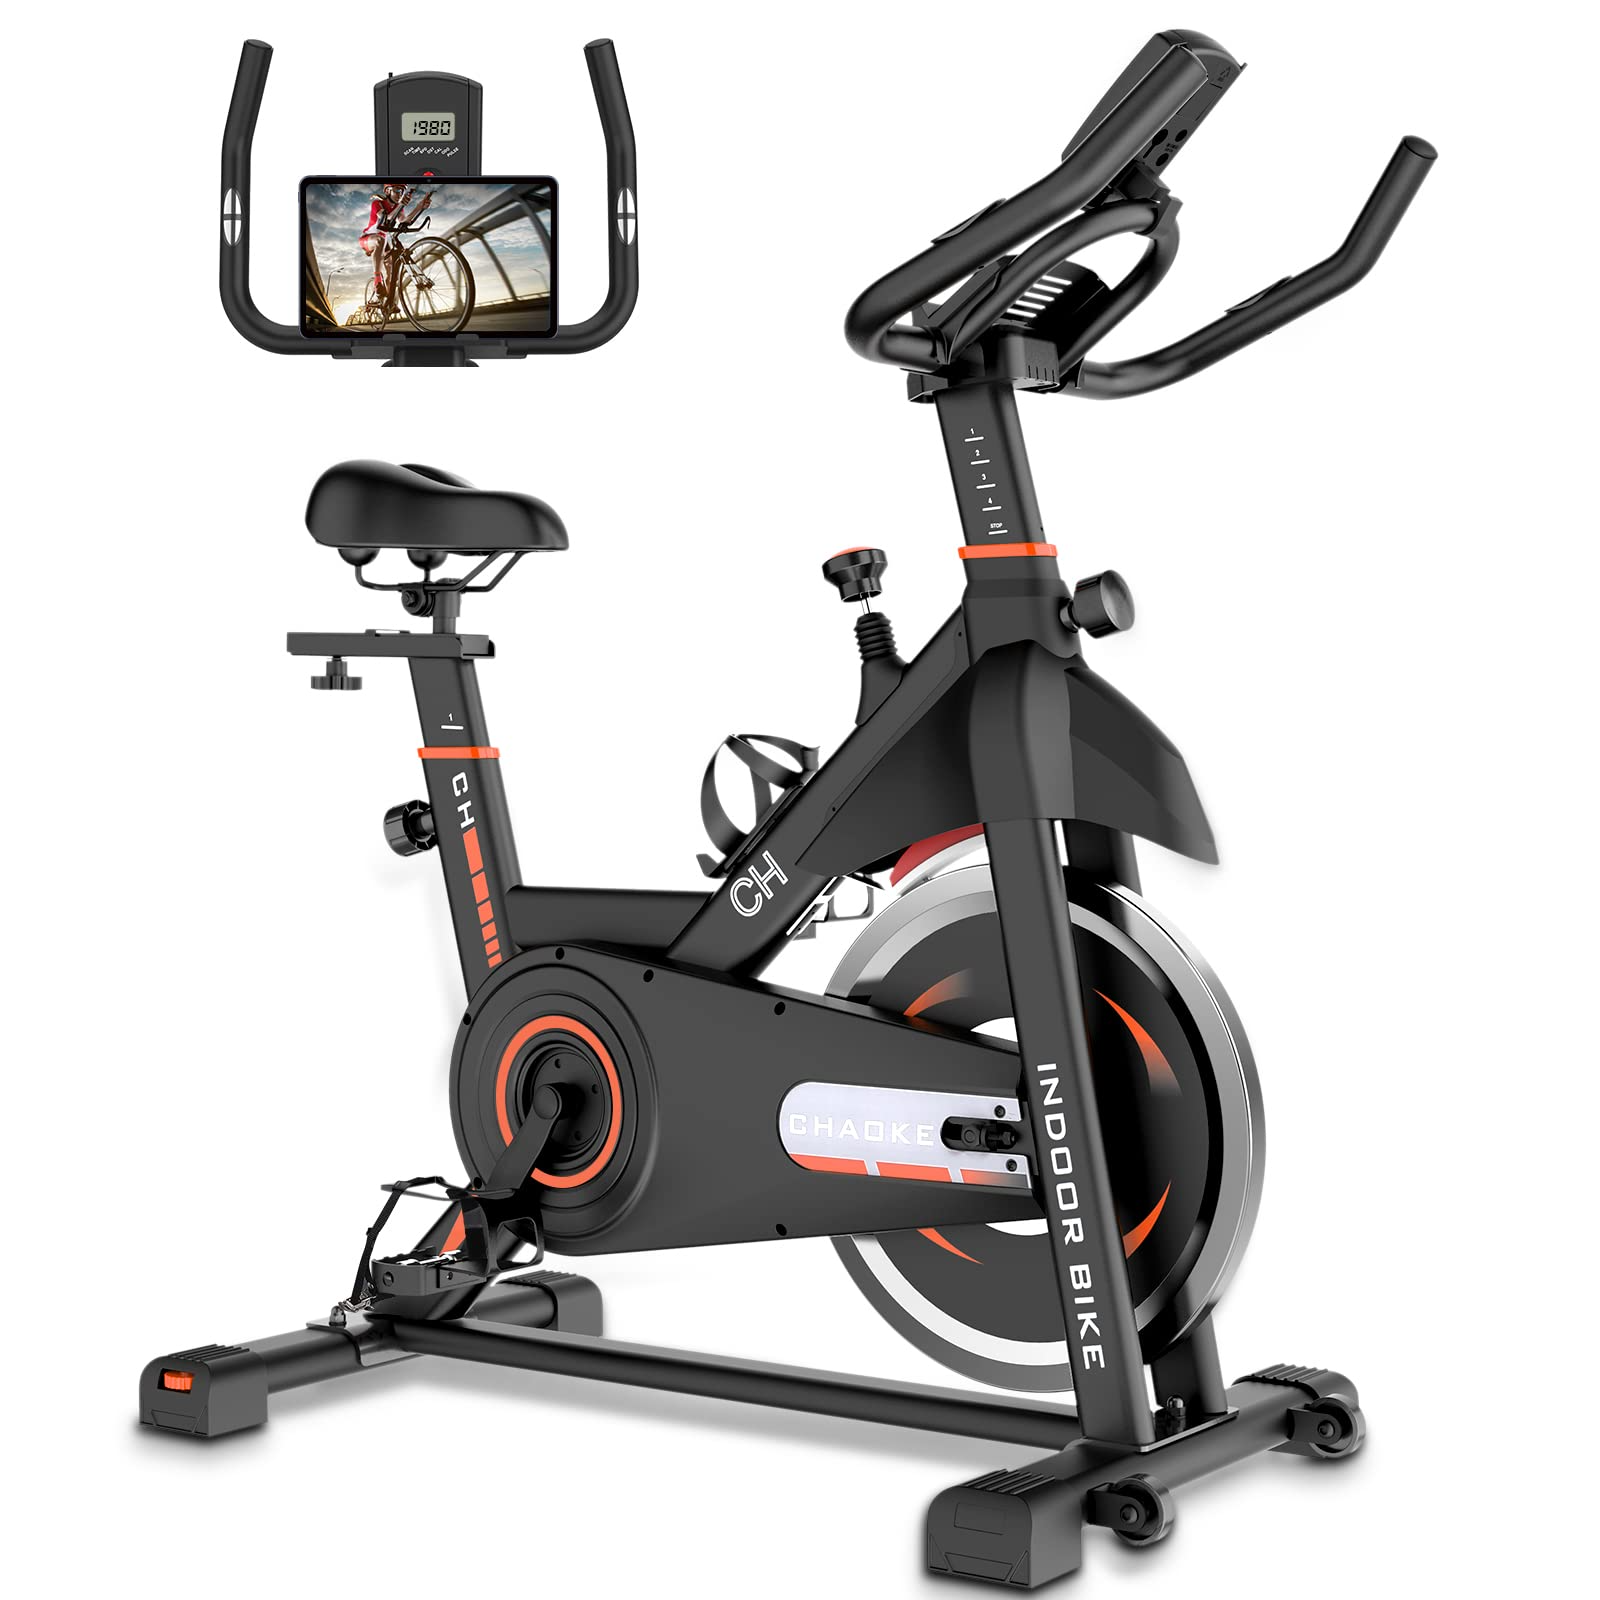 Exercise Bike,CHAOKE Indoor Cycling Bike,Stationary Bike Magnetic Resistance Whisper Quiet for Home Cardio Workout Heavy Flywheel & Comfortable Seat Cushion with Digital Monitor - image 1 of 7